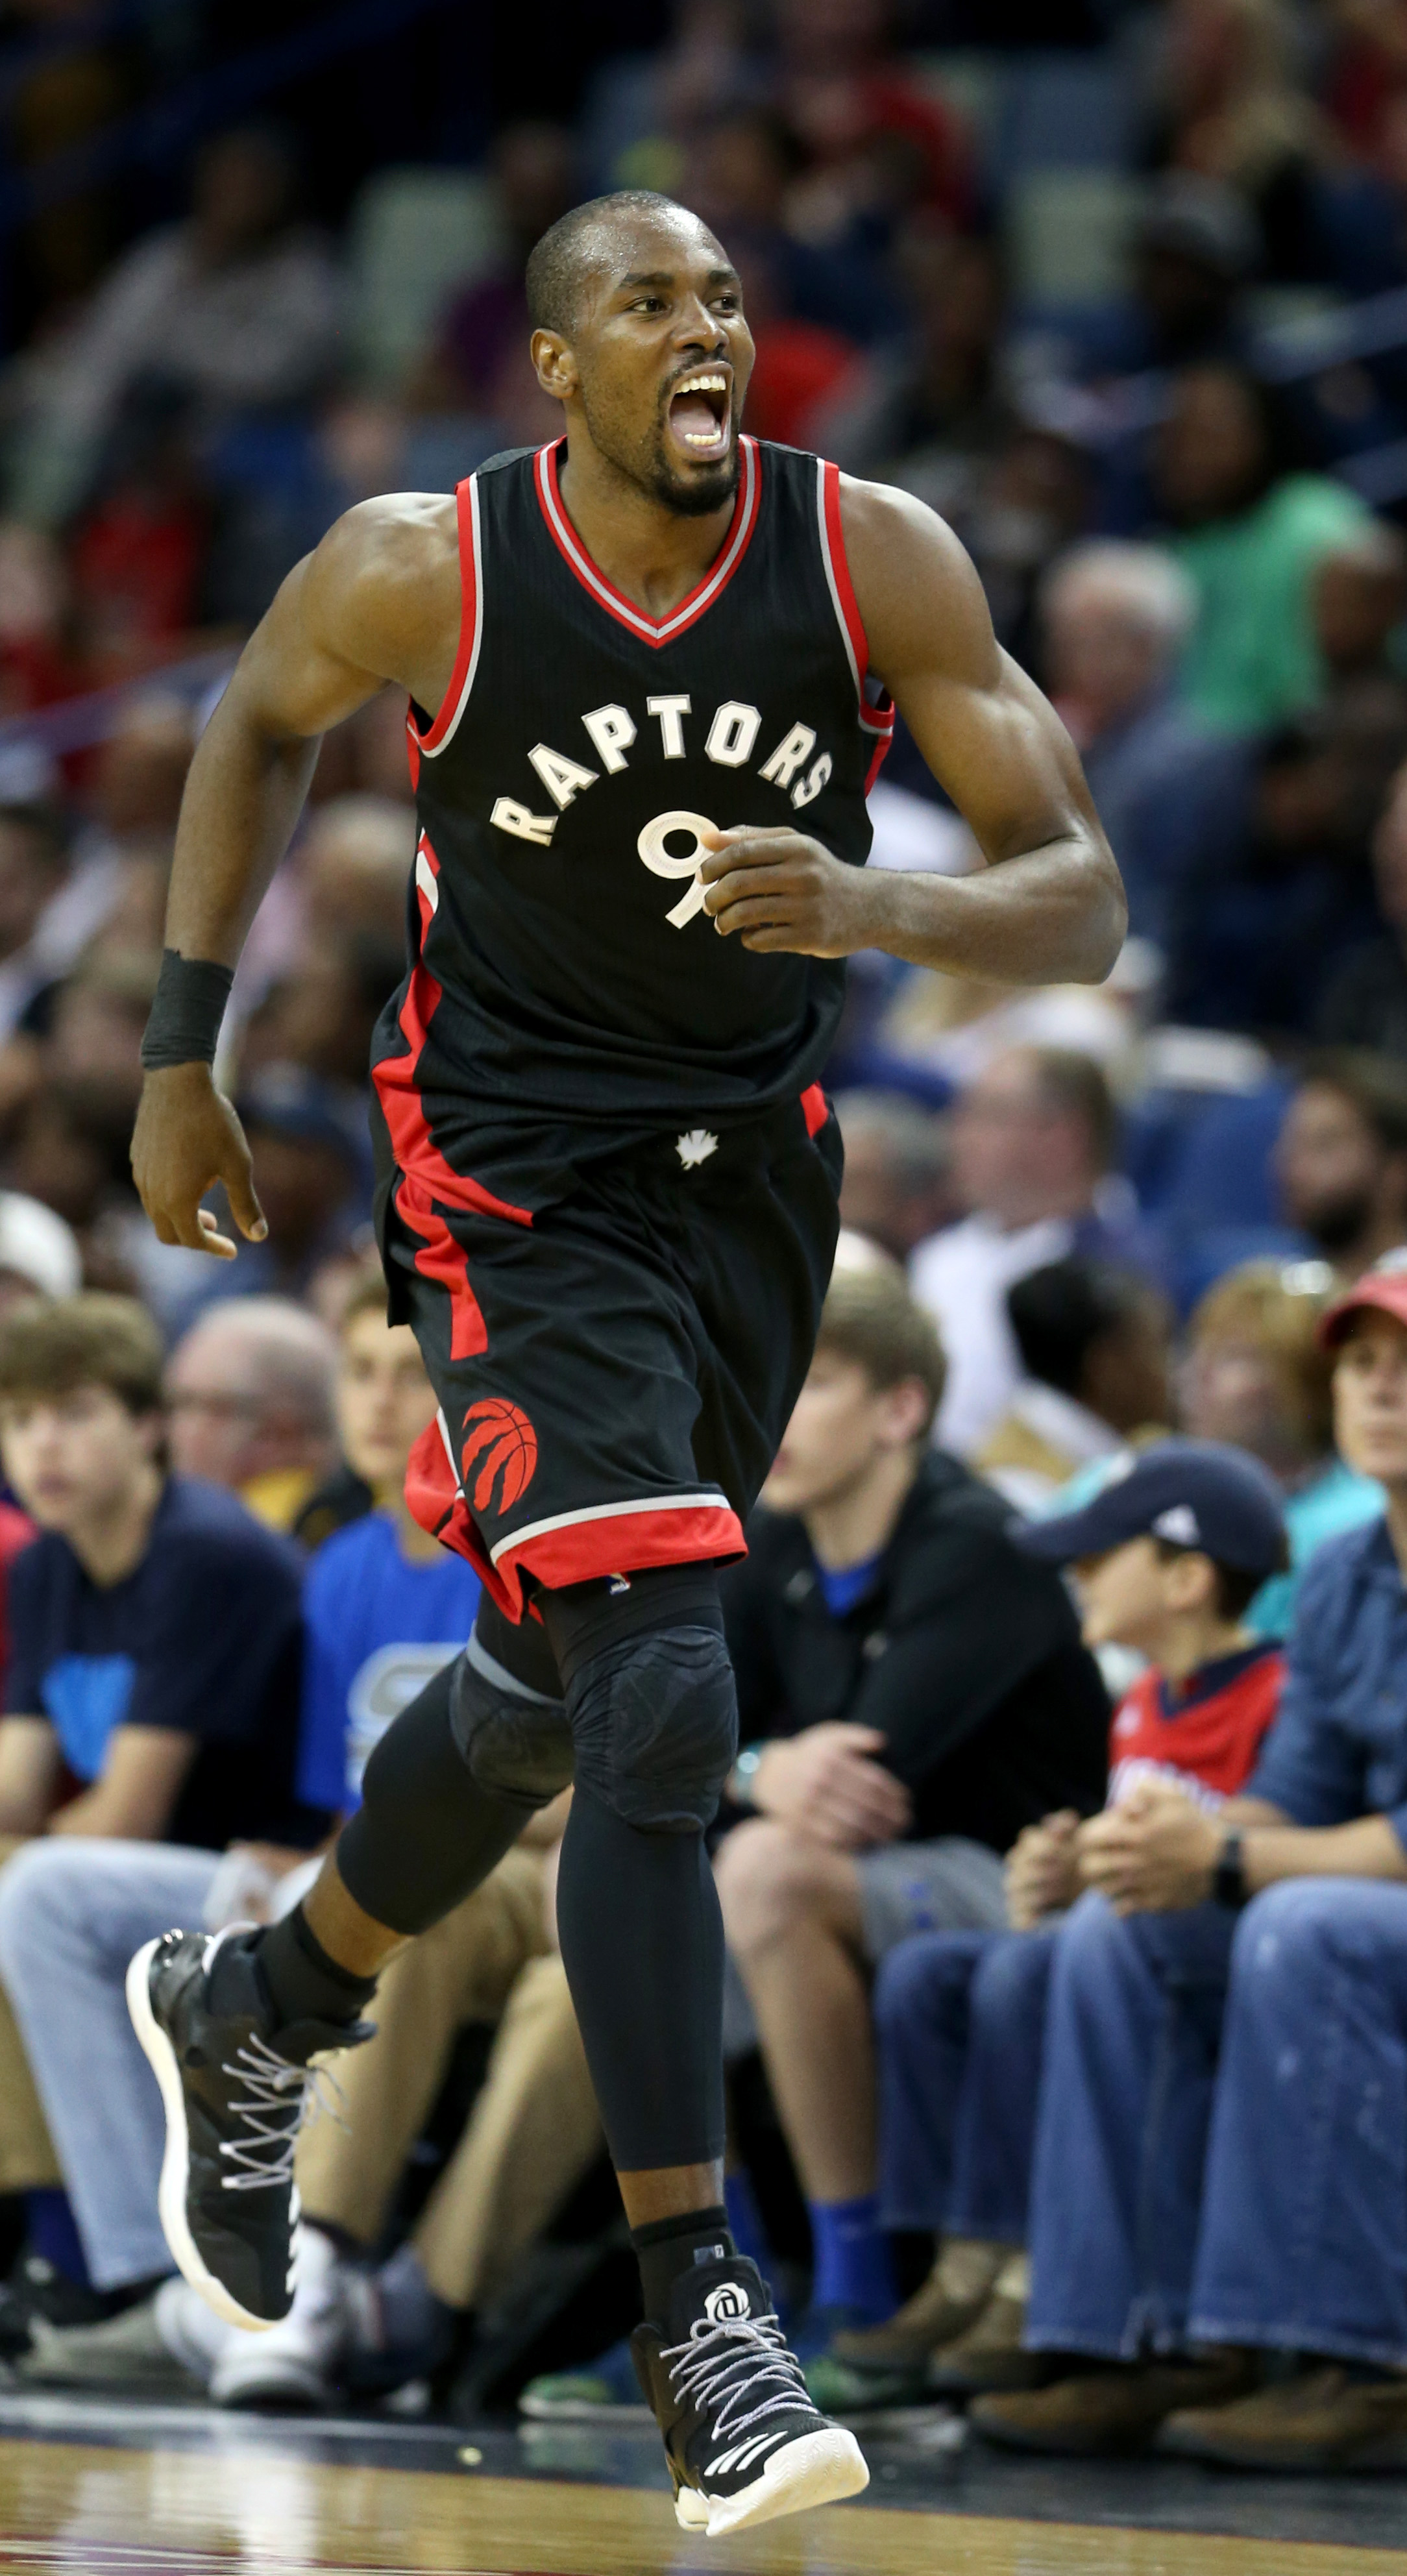 Raptors fans overjoyed as free agent Kyle Lowry re-signs in Toronto